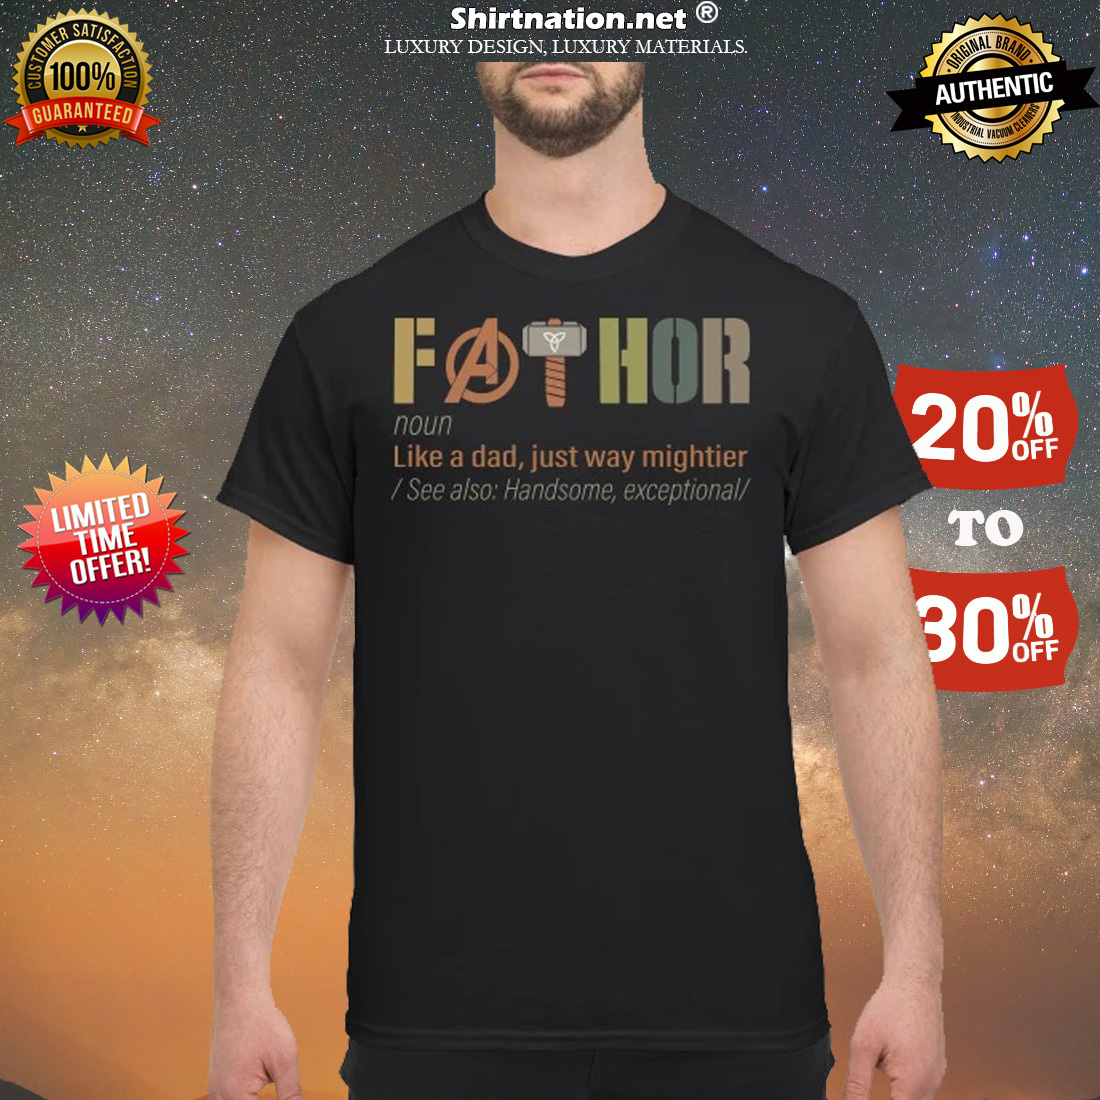 Avengers fathor like a dad just way mightier classic shirt